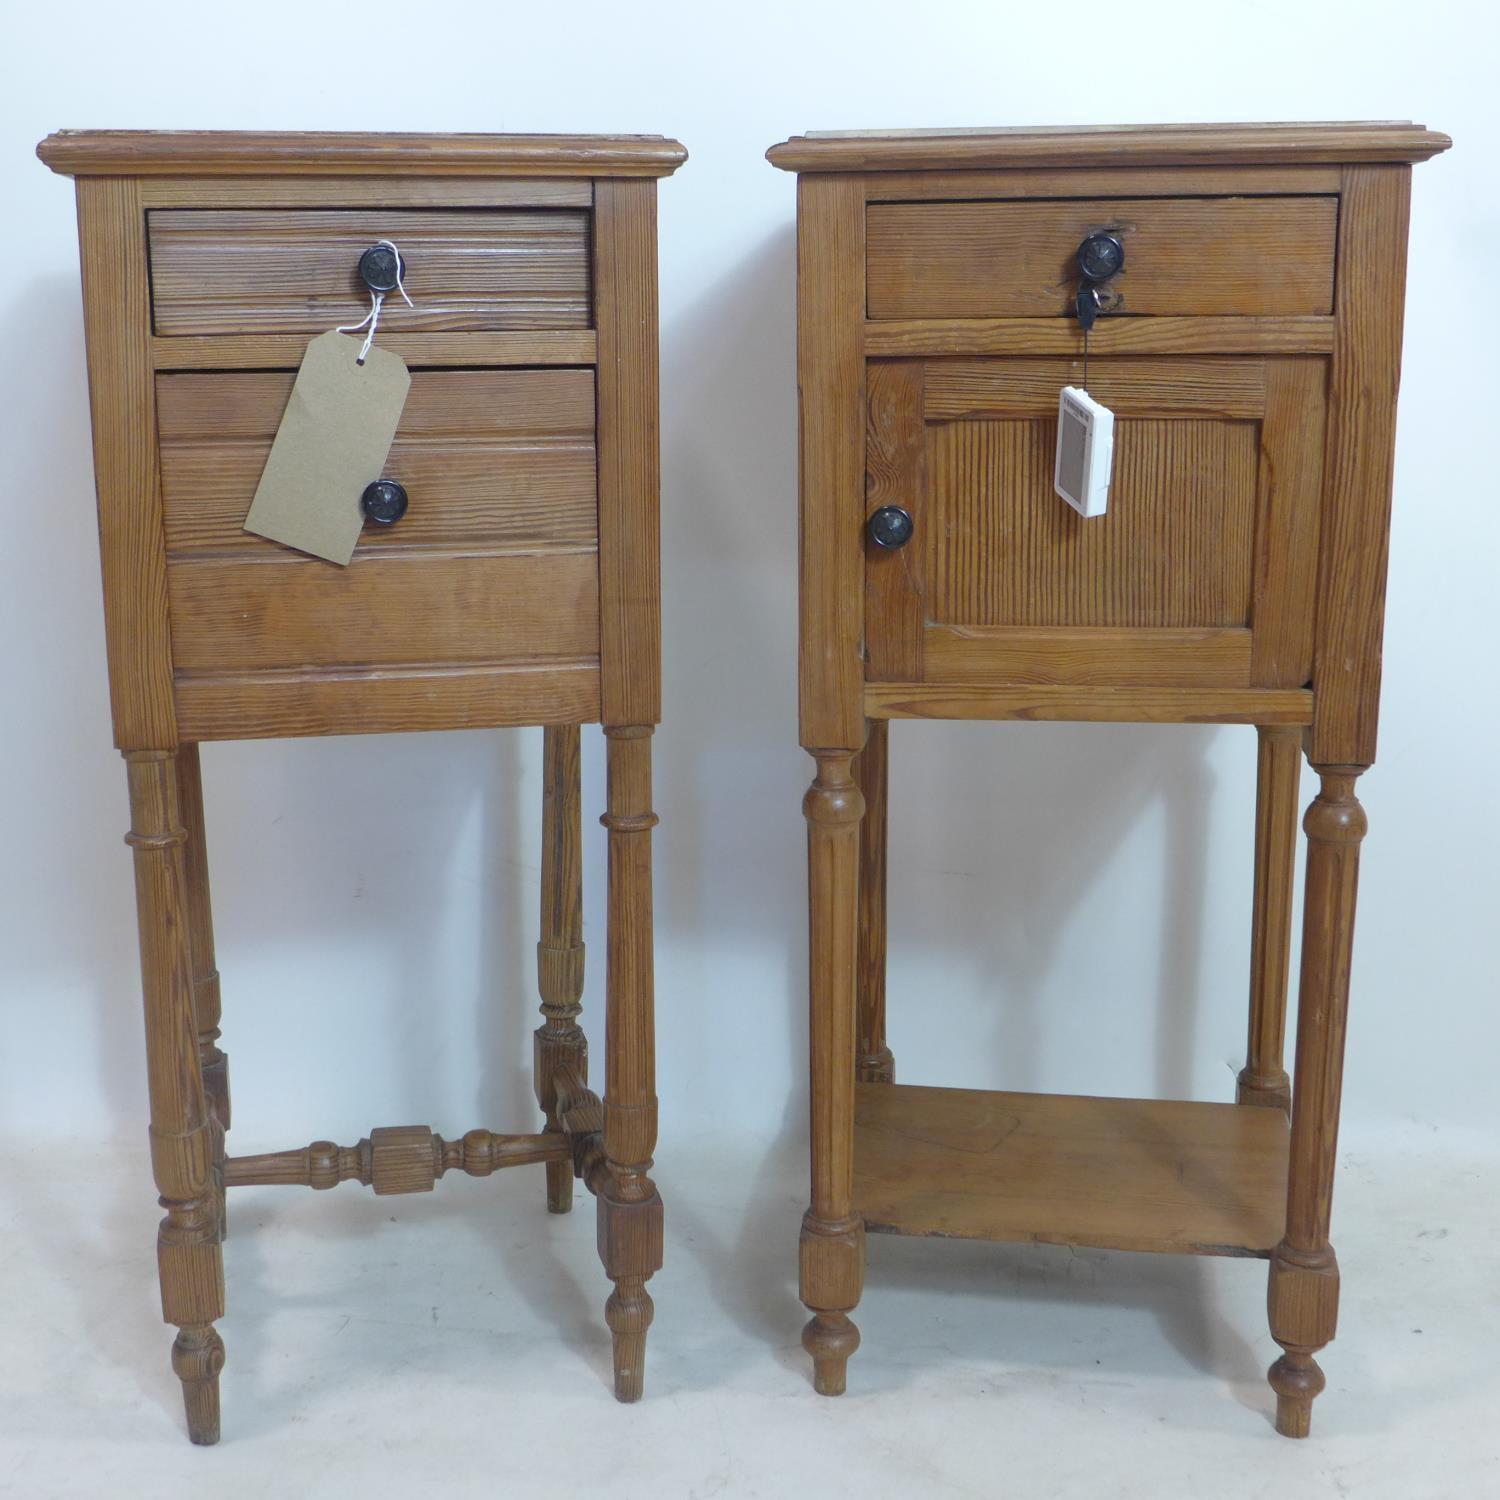 A pair of 20th century French pine bedside cabinets, H.80 W.37 D.36cm